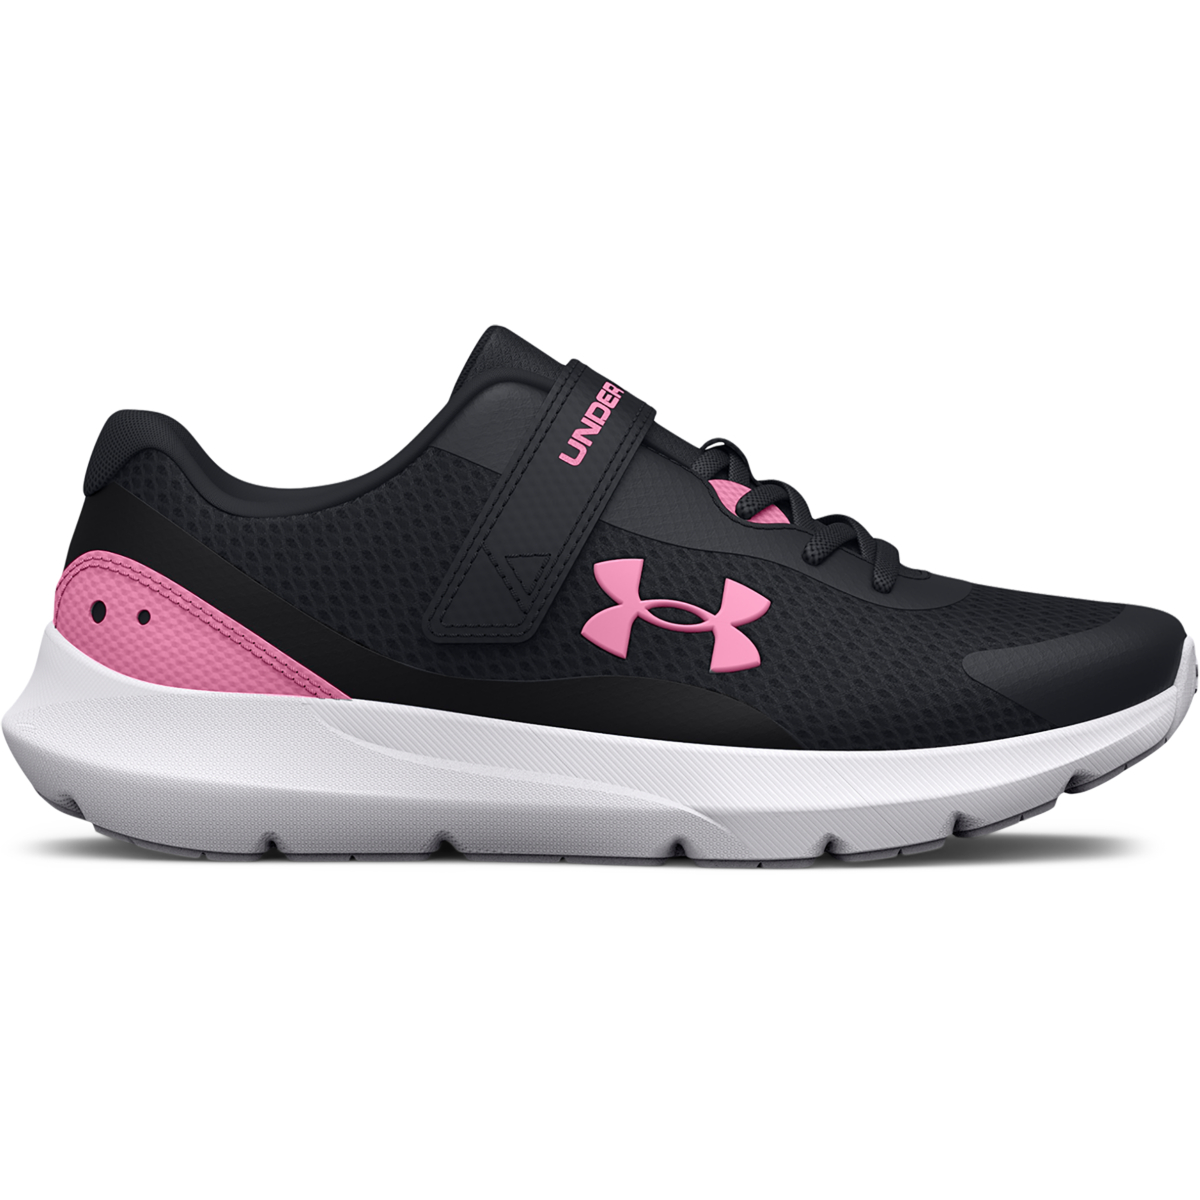 Under Armour - 3025014 GPS SURGE 3 AC - 001/71P7 Παιδικά > Παπούτσια > Αθλητικά > Παπούτσι Low Cut